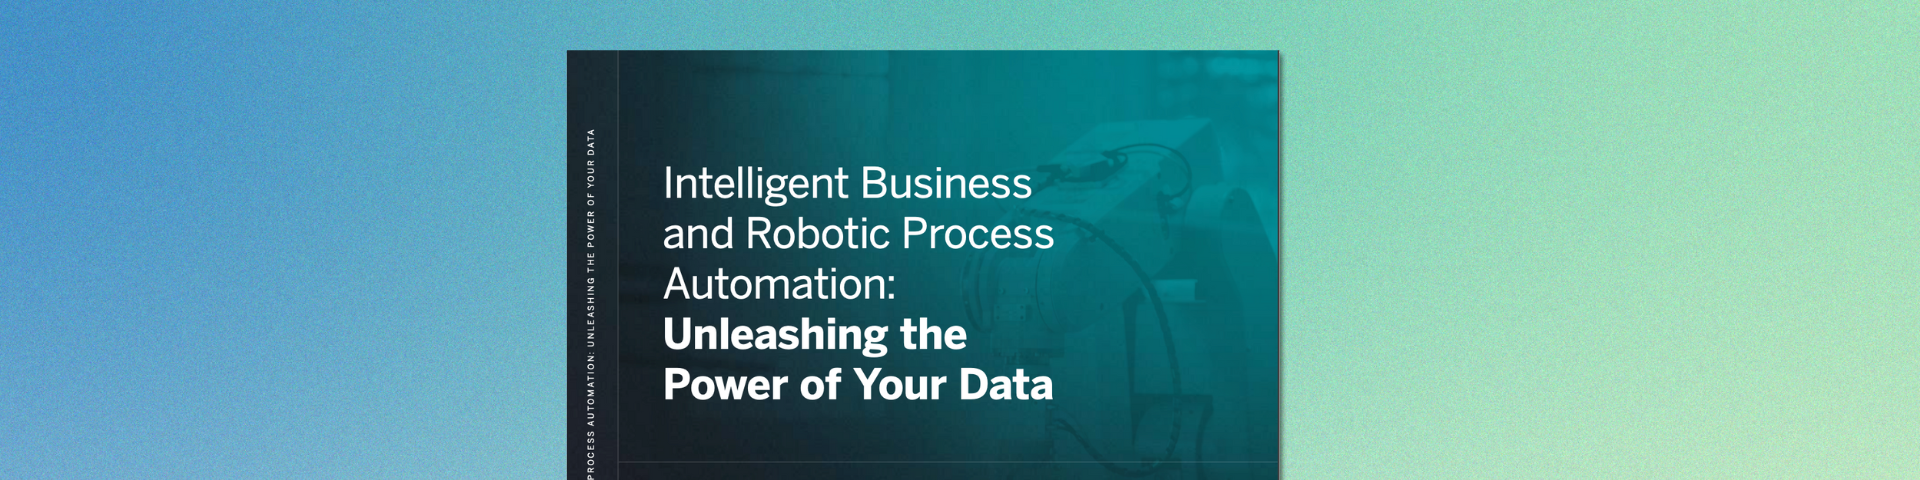 Intelligent Business and Robotic Process Automation Unleashing the Power of Your Data eBook - Ripcord